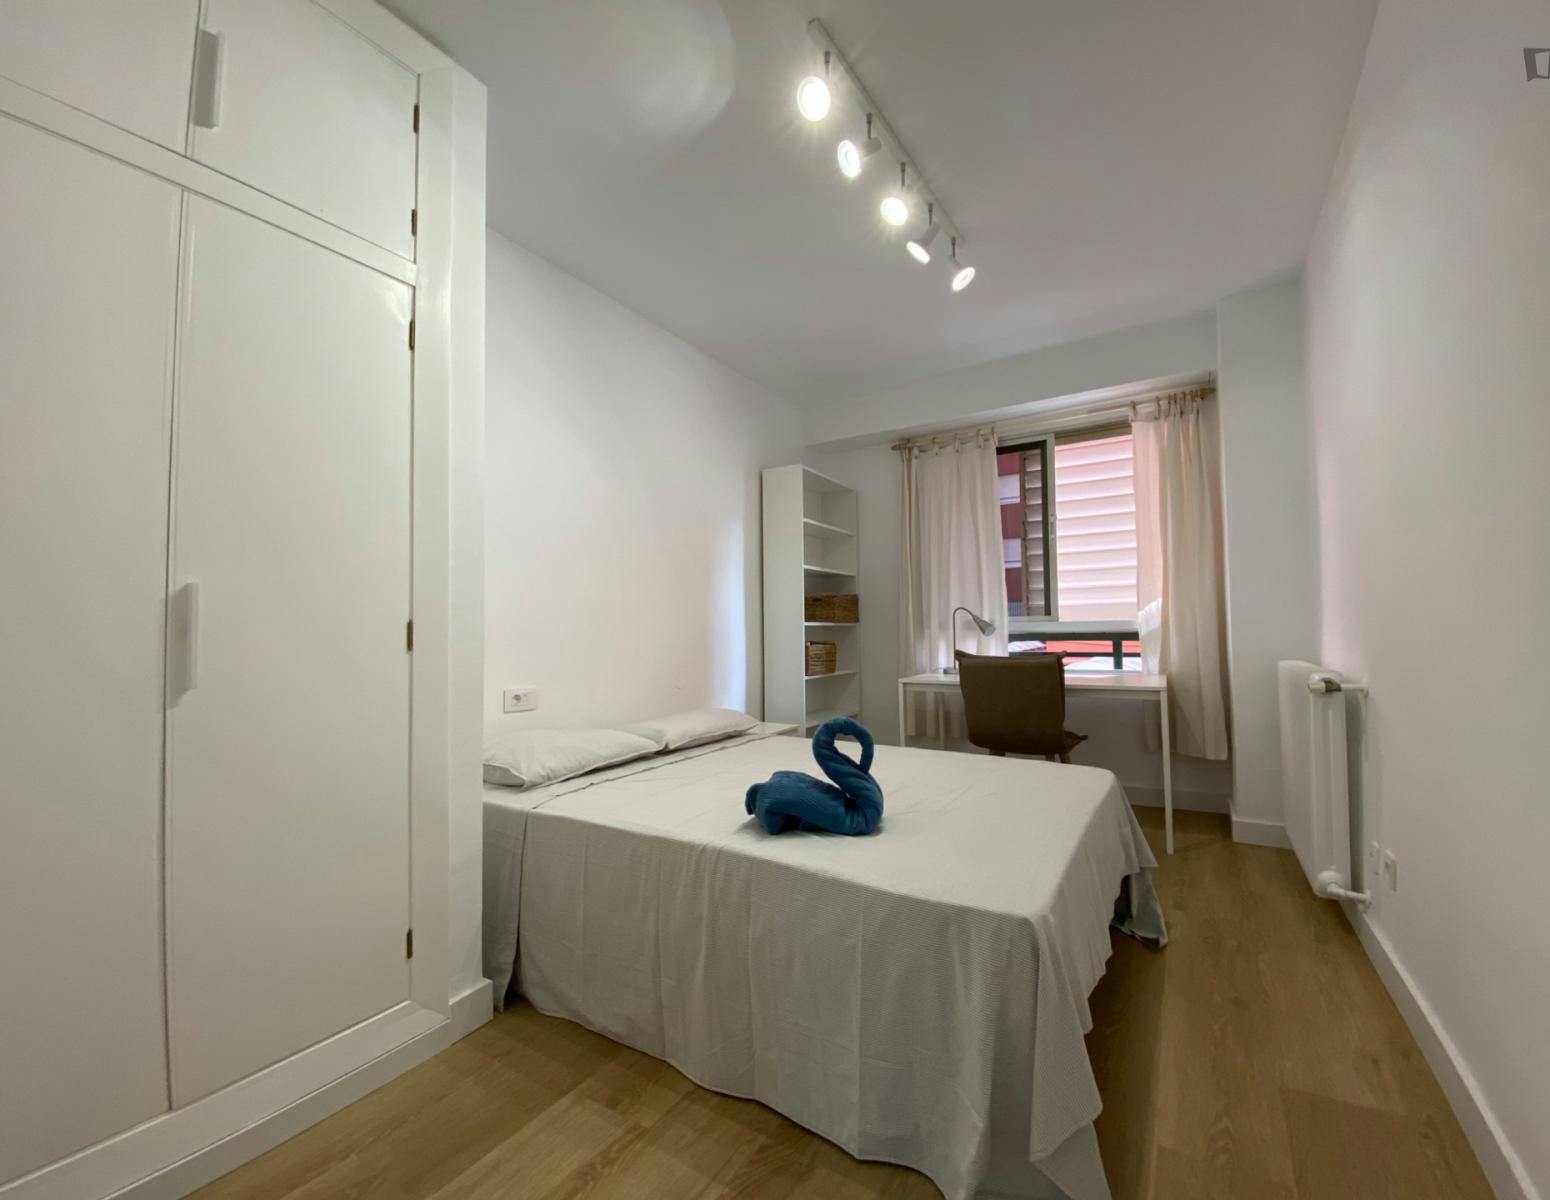 GREAT COMFORTABLE Bedroom in BEST LOCATION fully RENOVATED Apartment